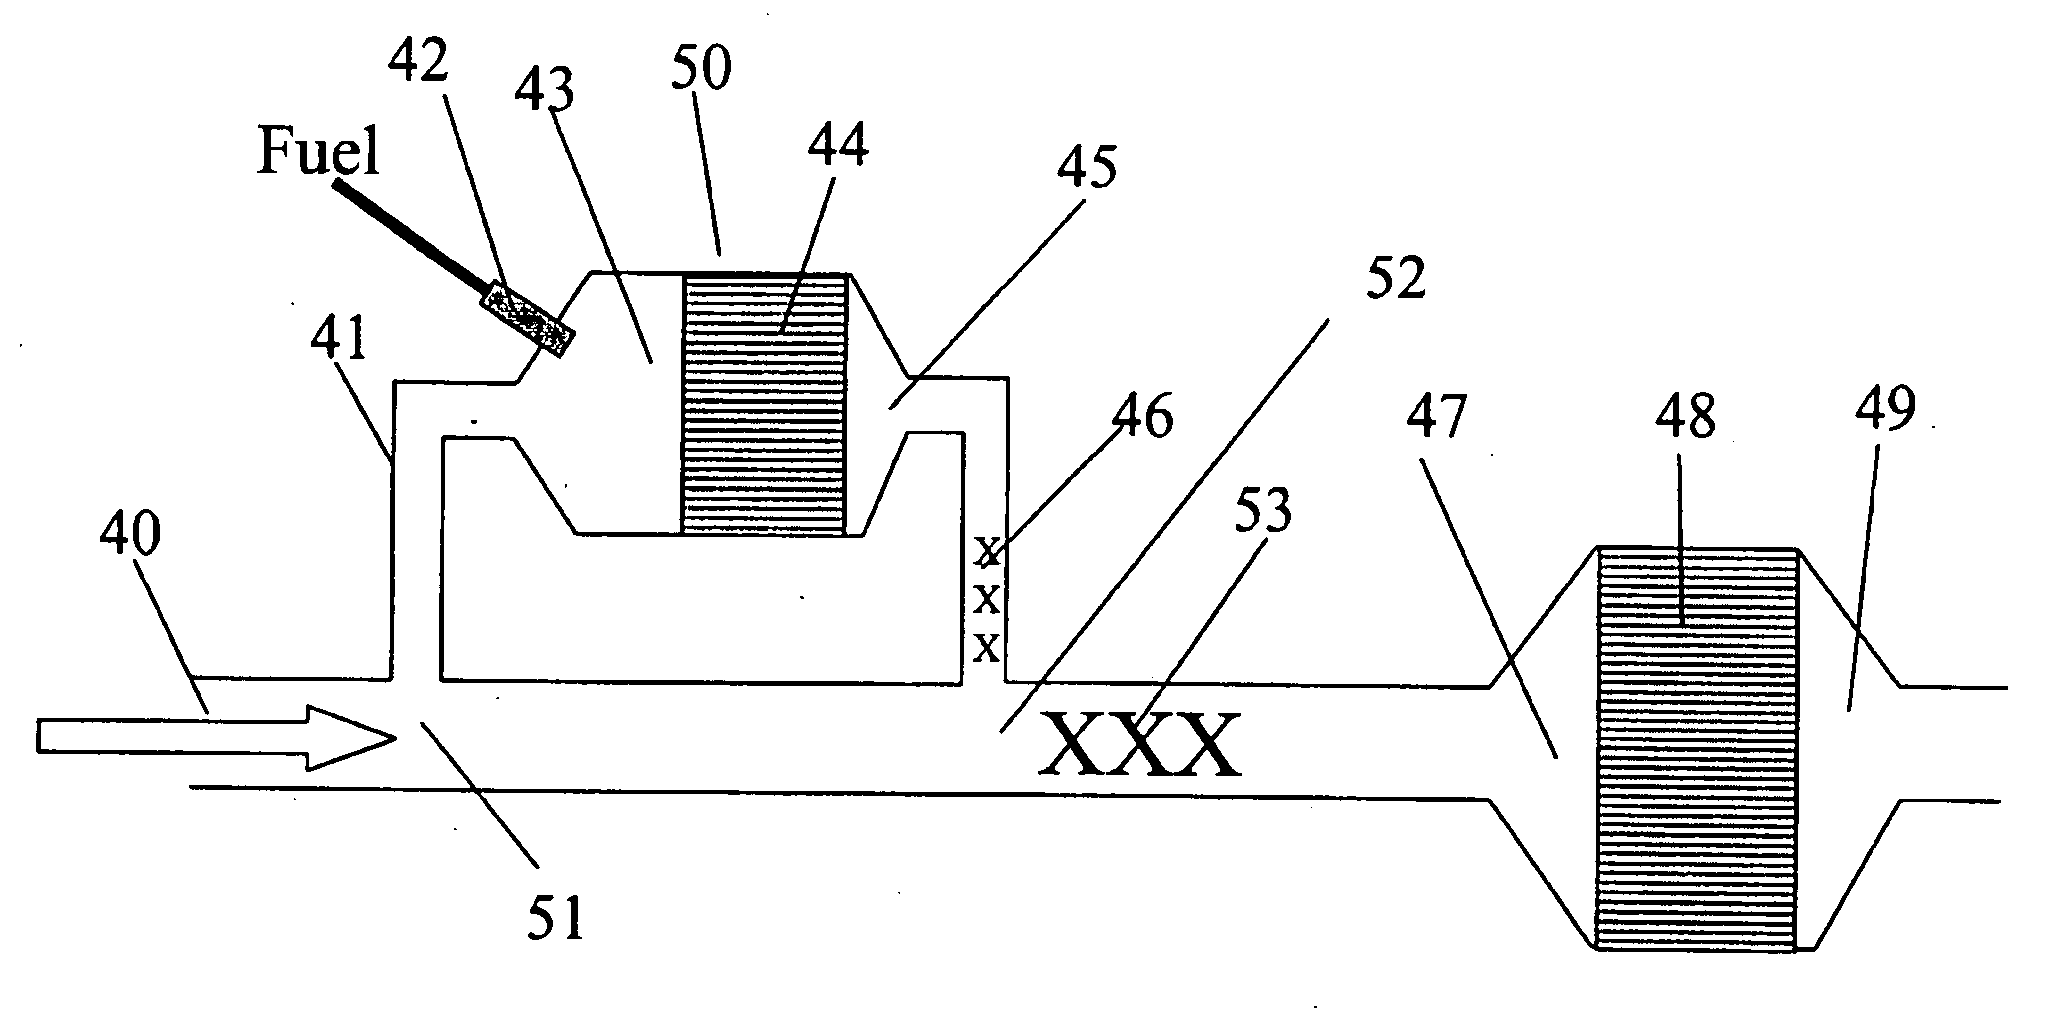 Devices and methods for reduction of NOx emissions from lean burn engines